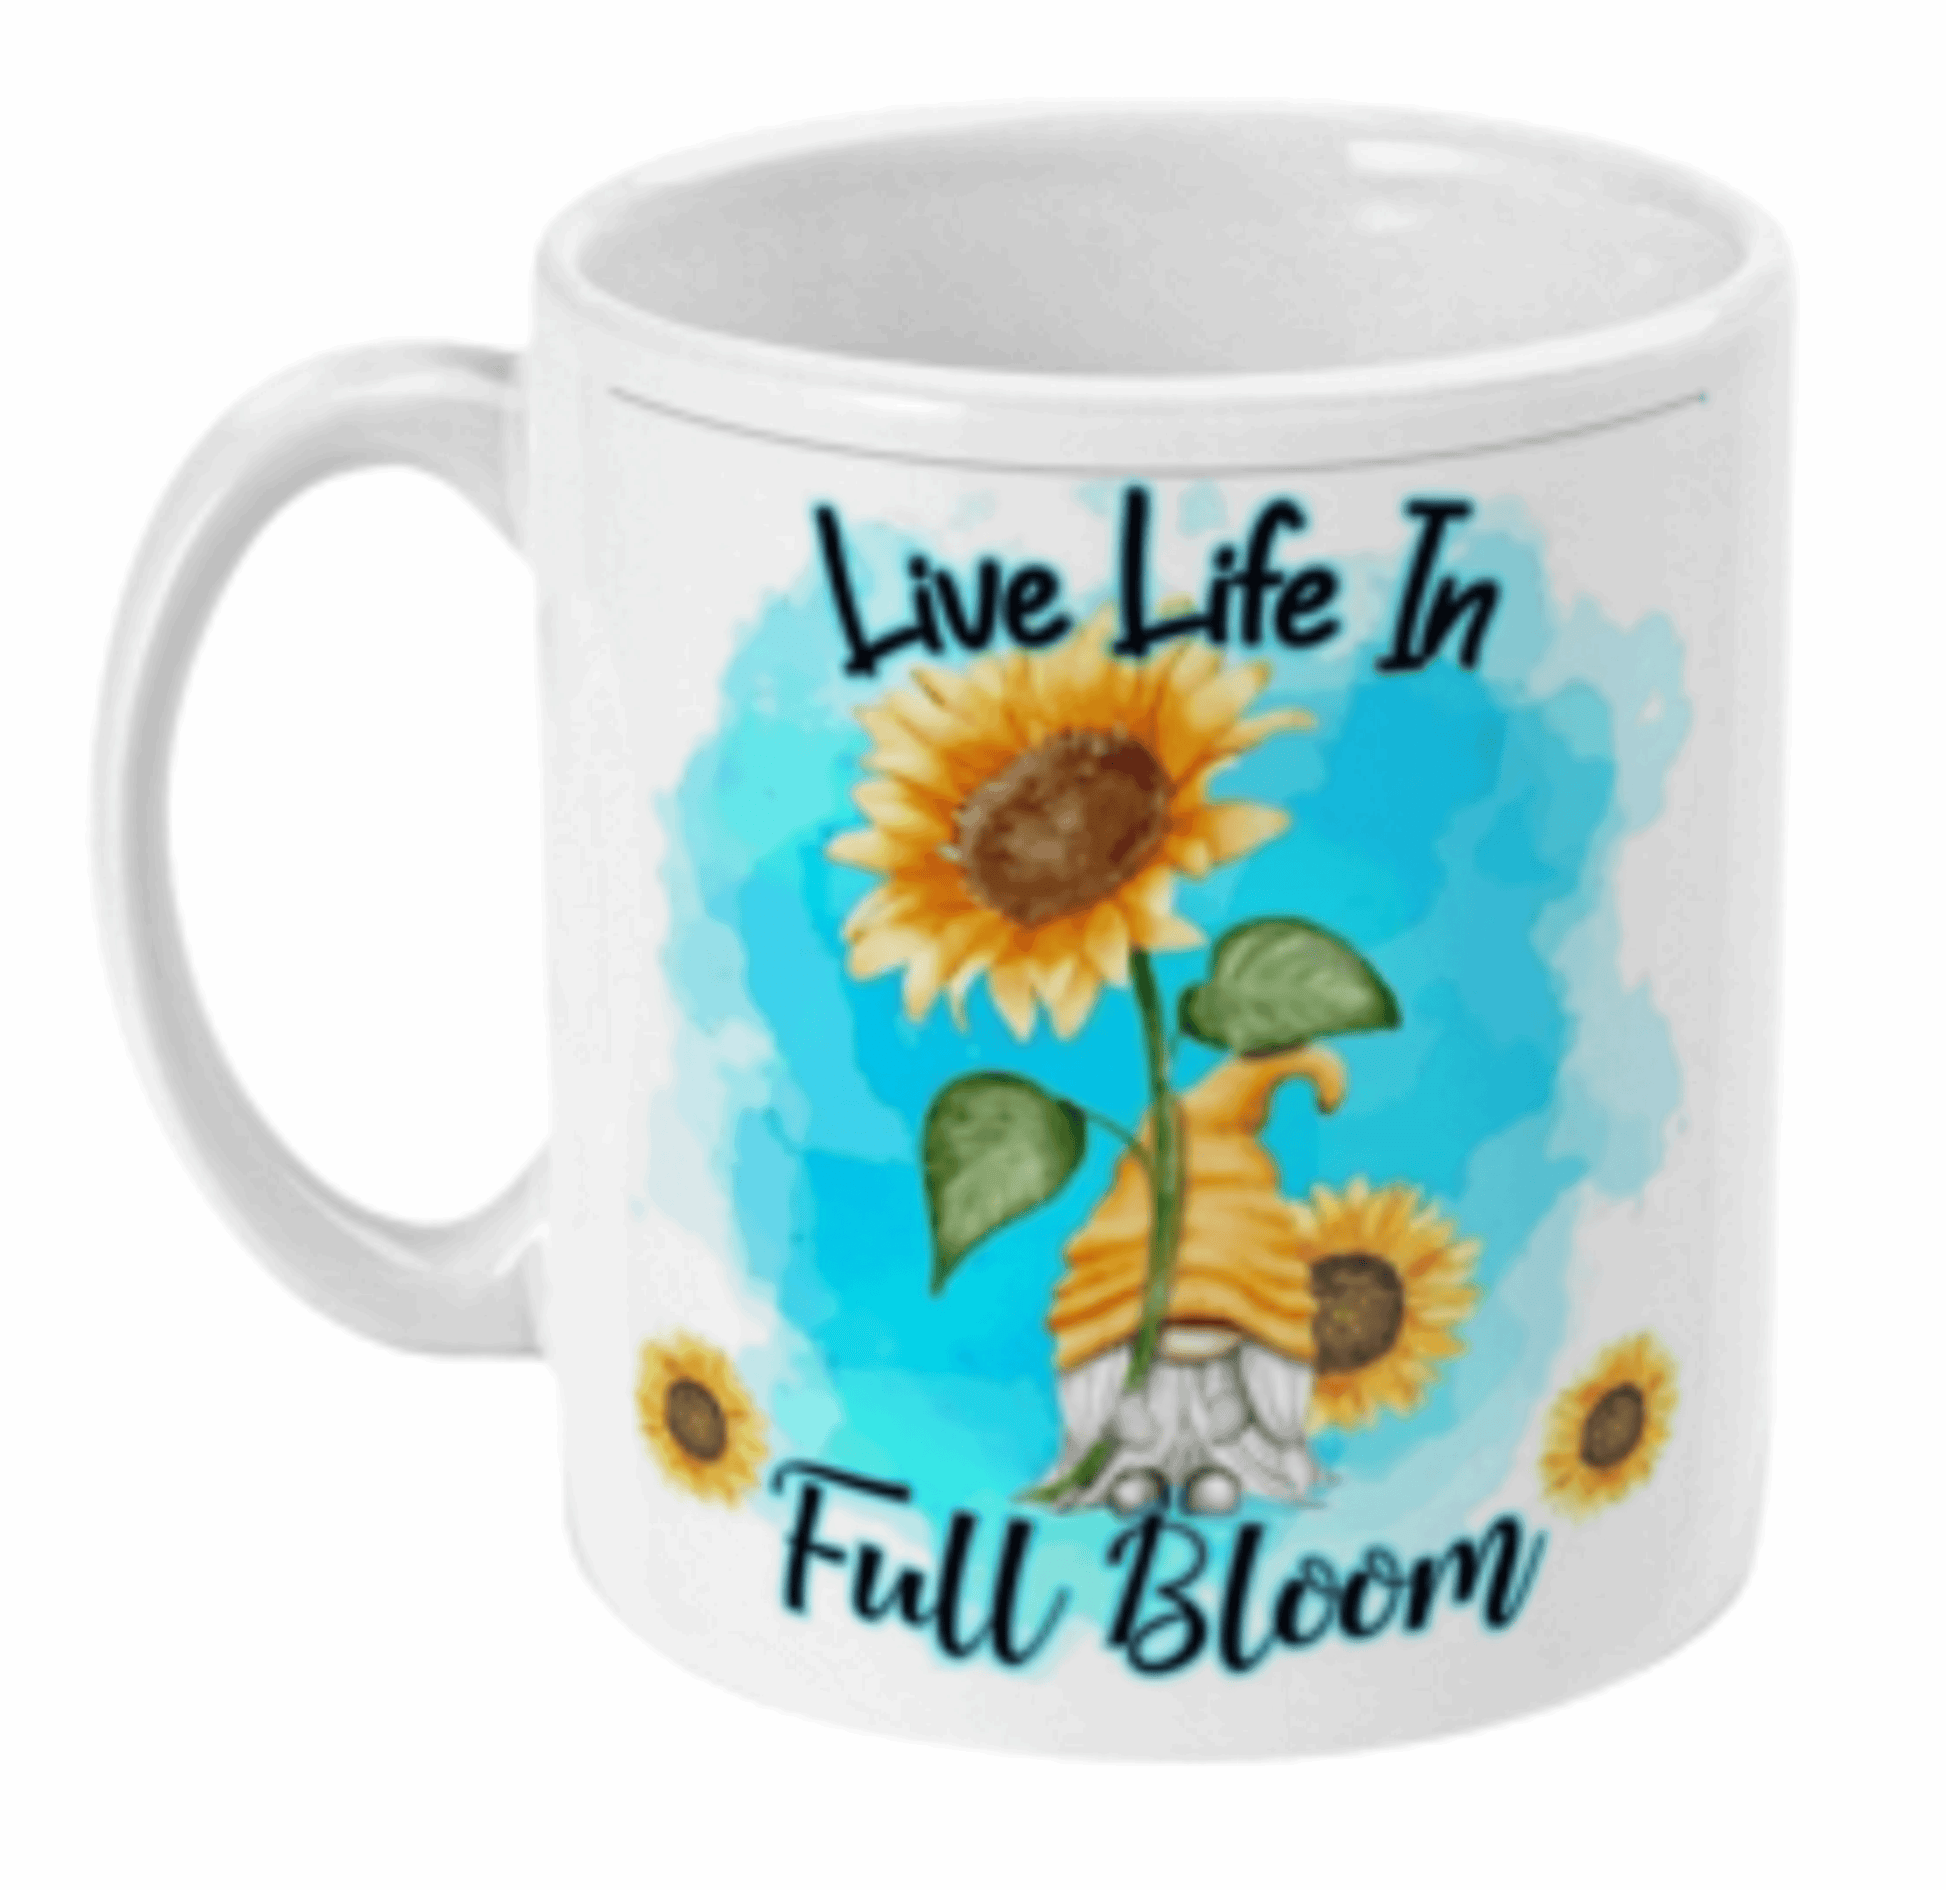  Live Life In Full Bloom Gnome Coffee Mug by Free Spirit Accessories sold by Free Spirit Accessories